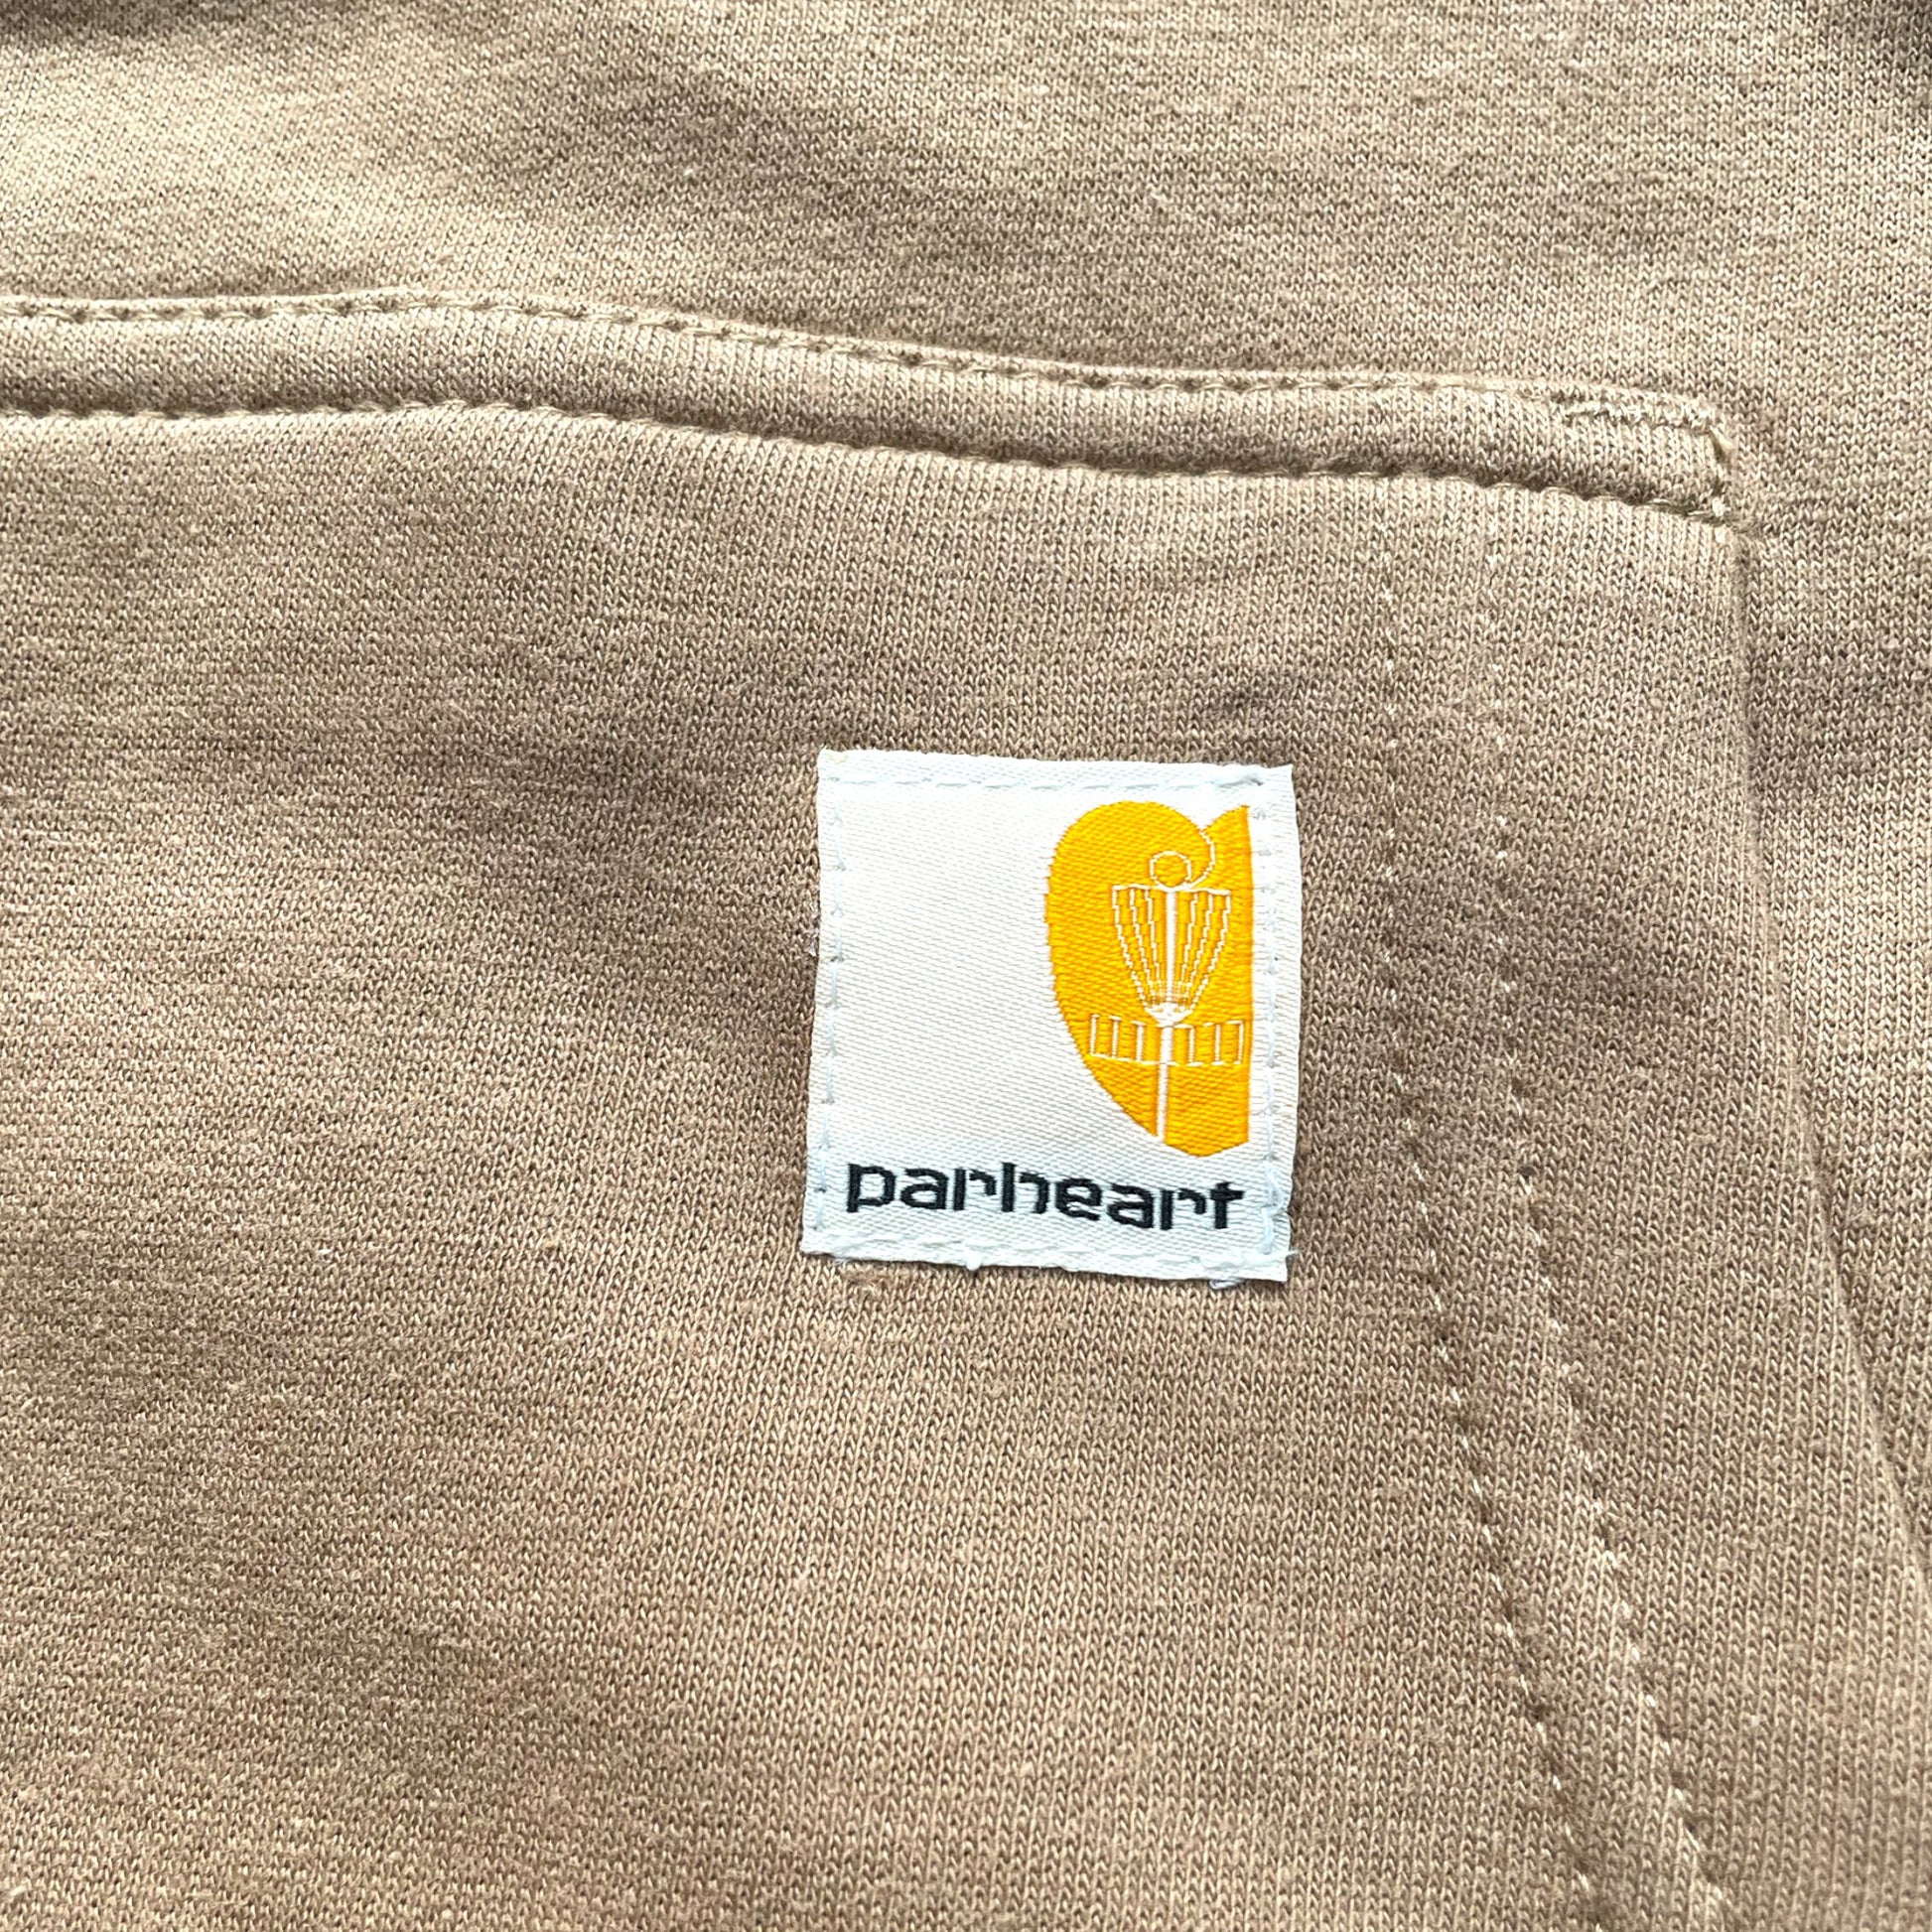 Perks and Re-creation Parheart Hoodie Disc Golf